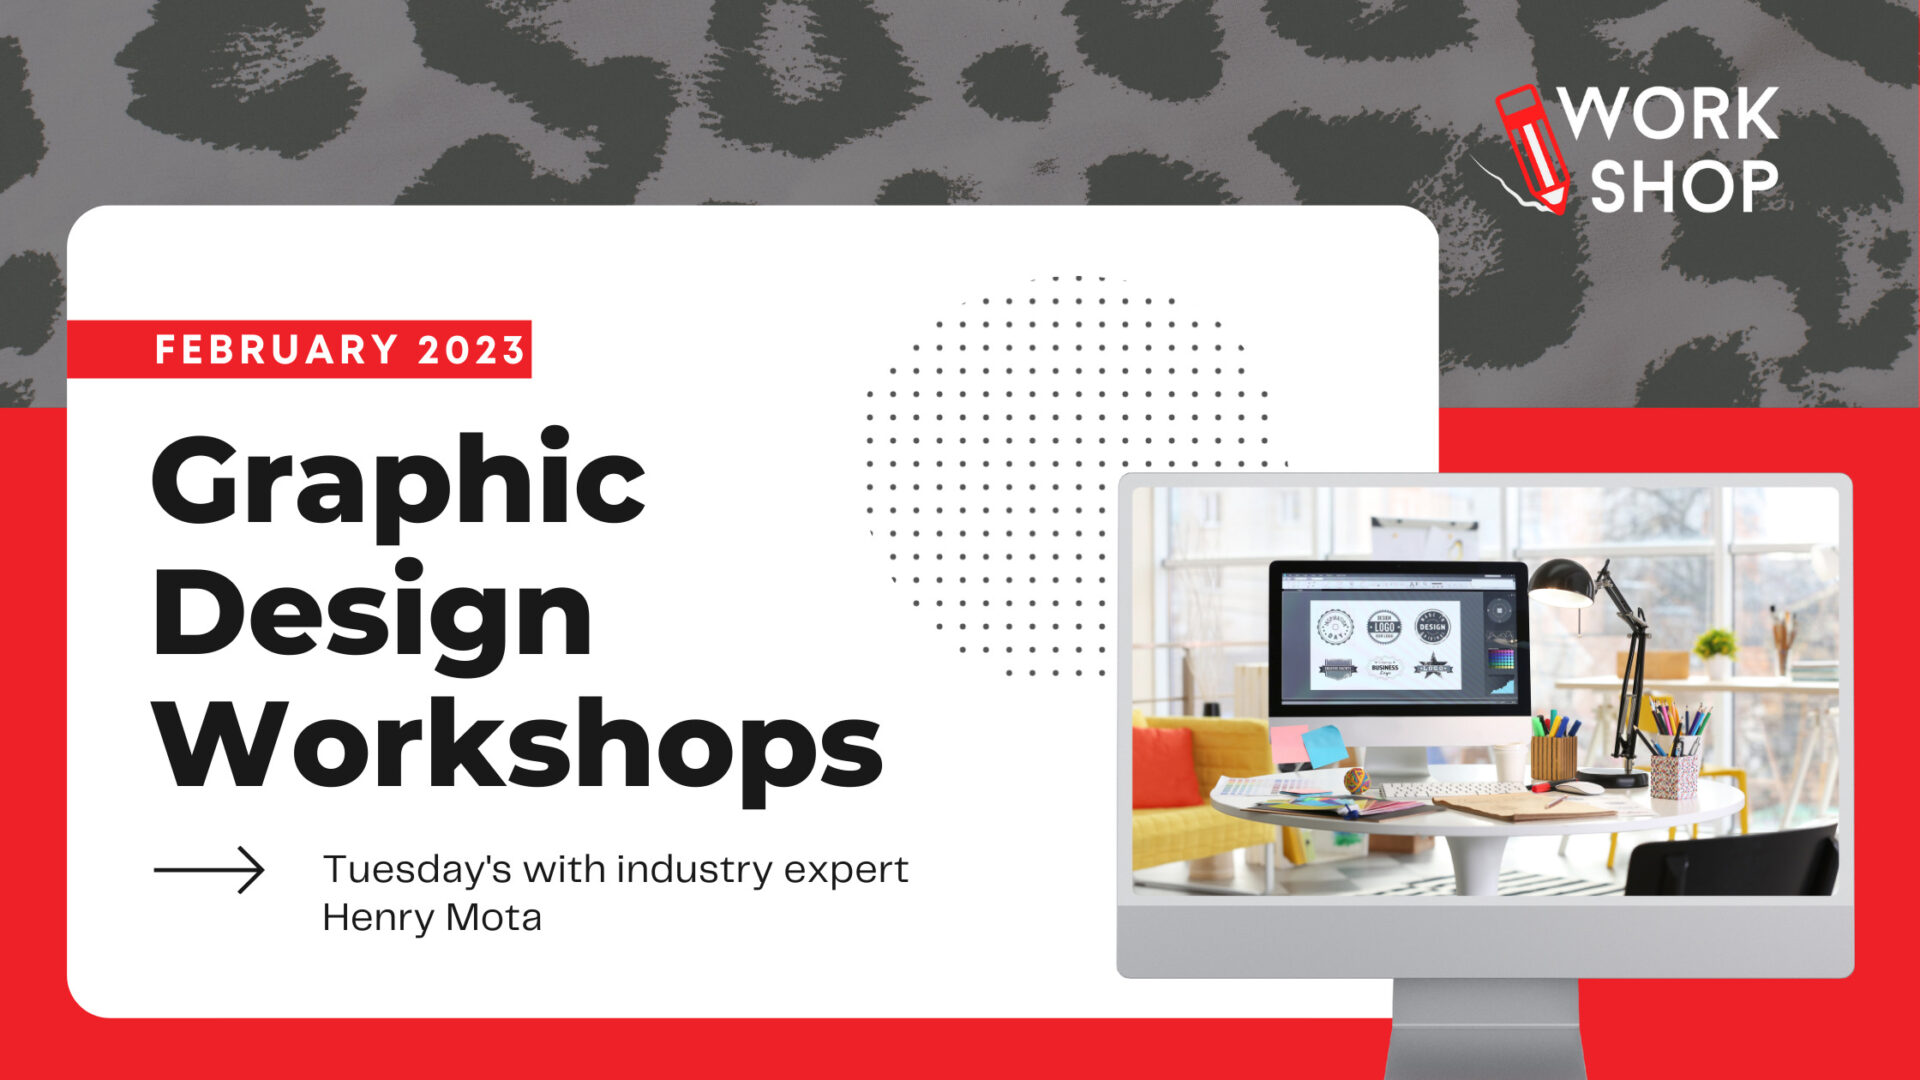 Level-up Your Design Skills with our February Graphic Design Workshops